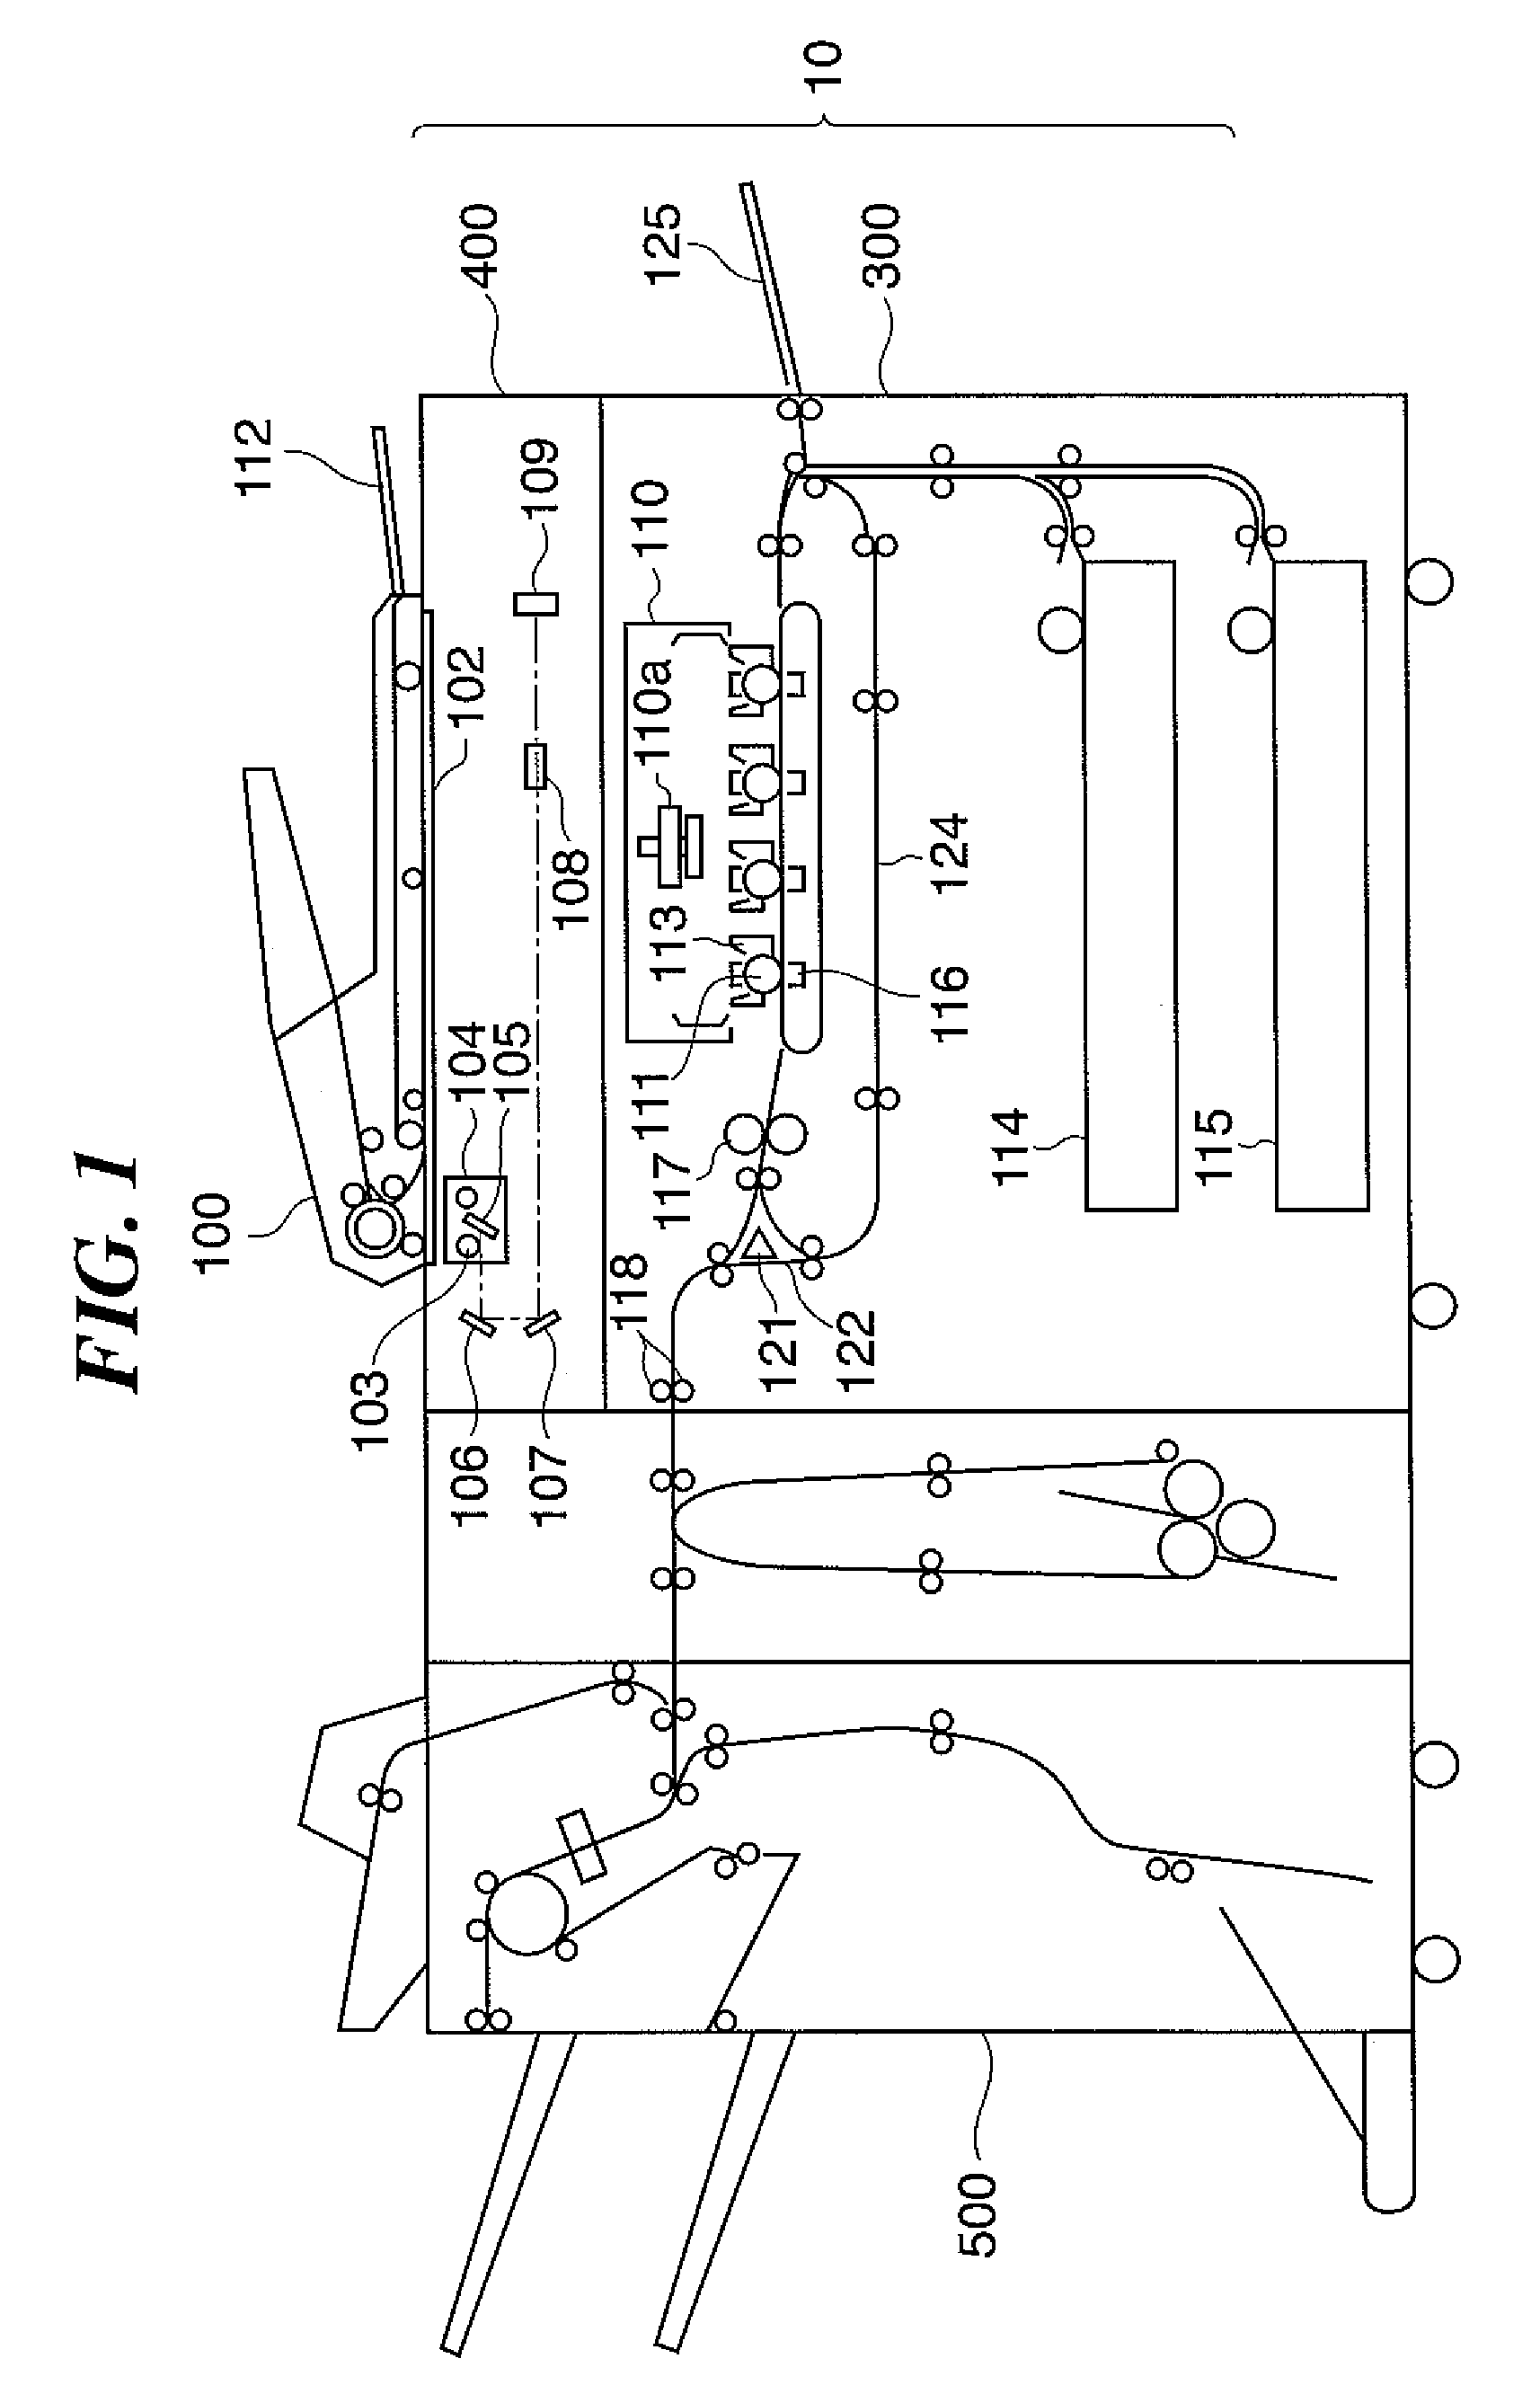 Image forming apparatus and gloss level control method